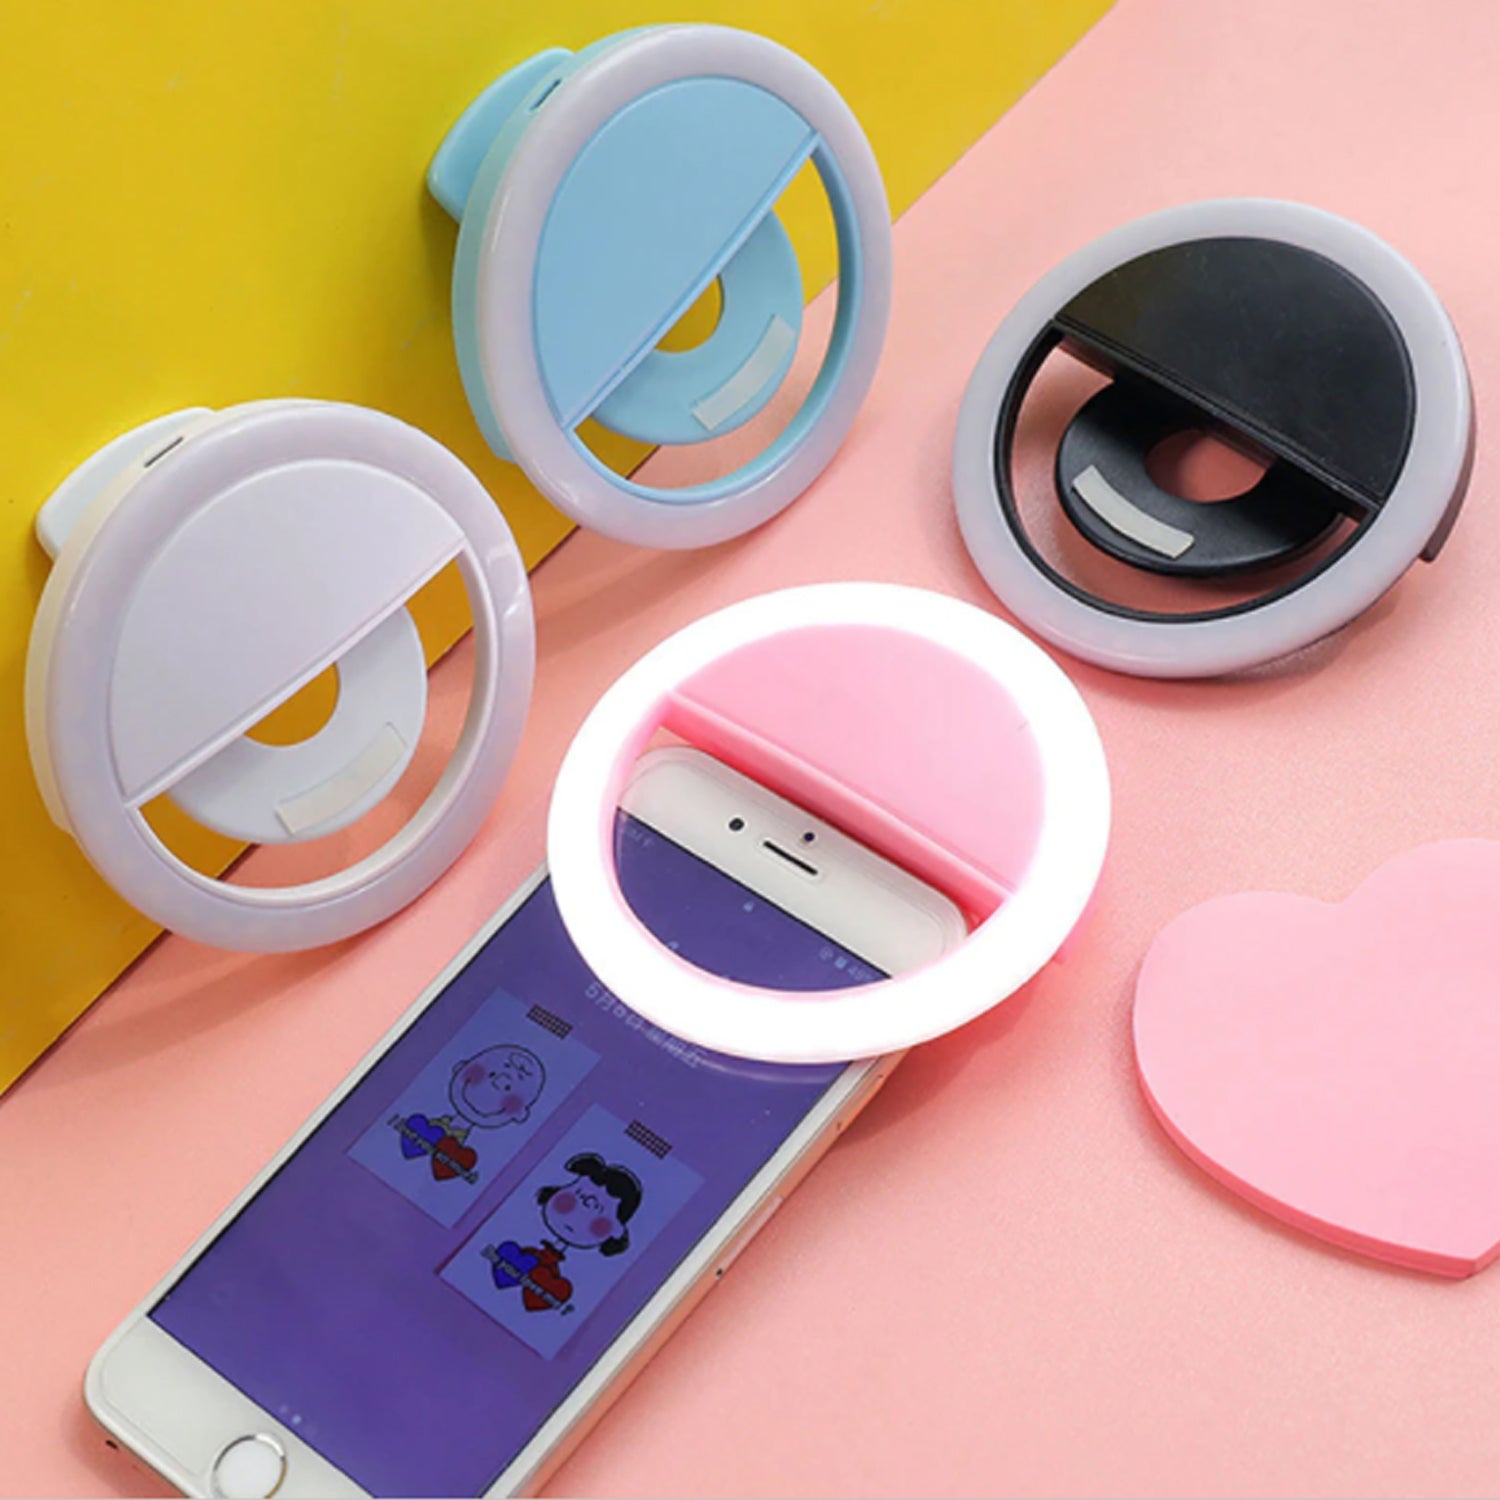 4785 Selfie Ring Light used for applying bright shade over face during taking selfies and making videos etc.